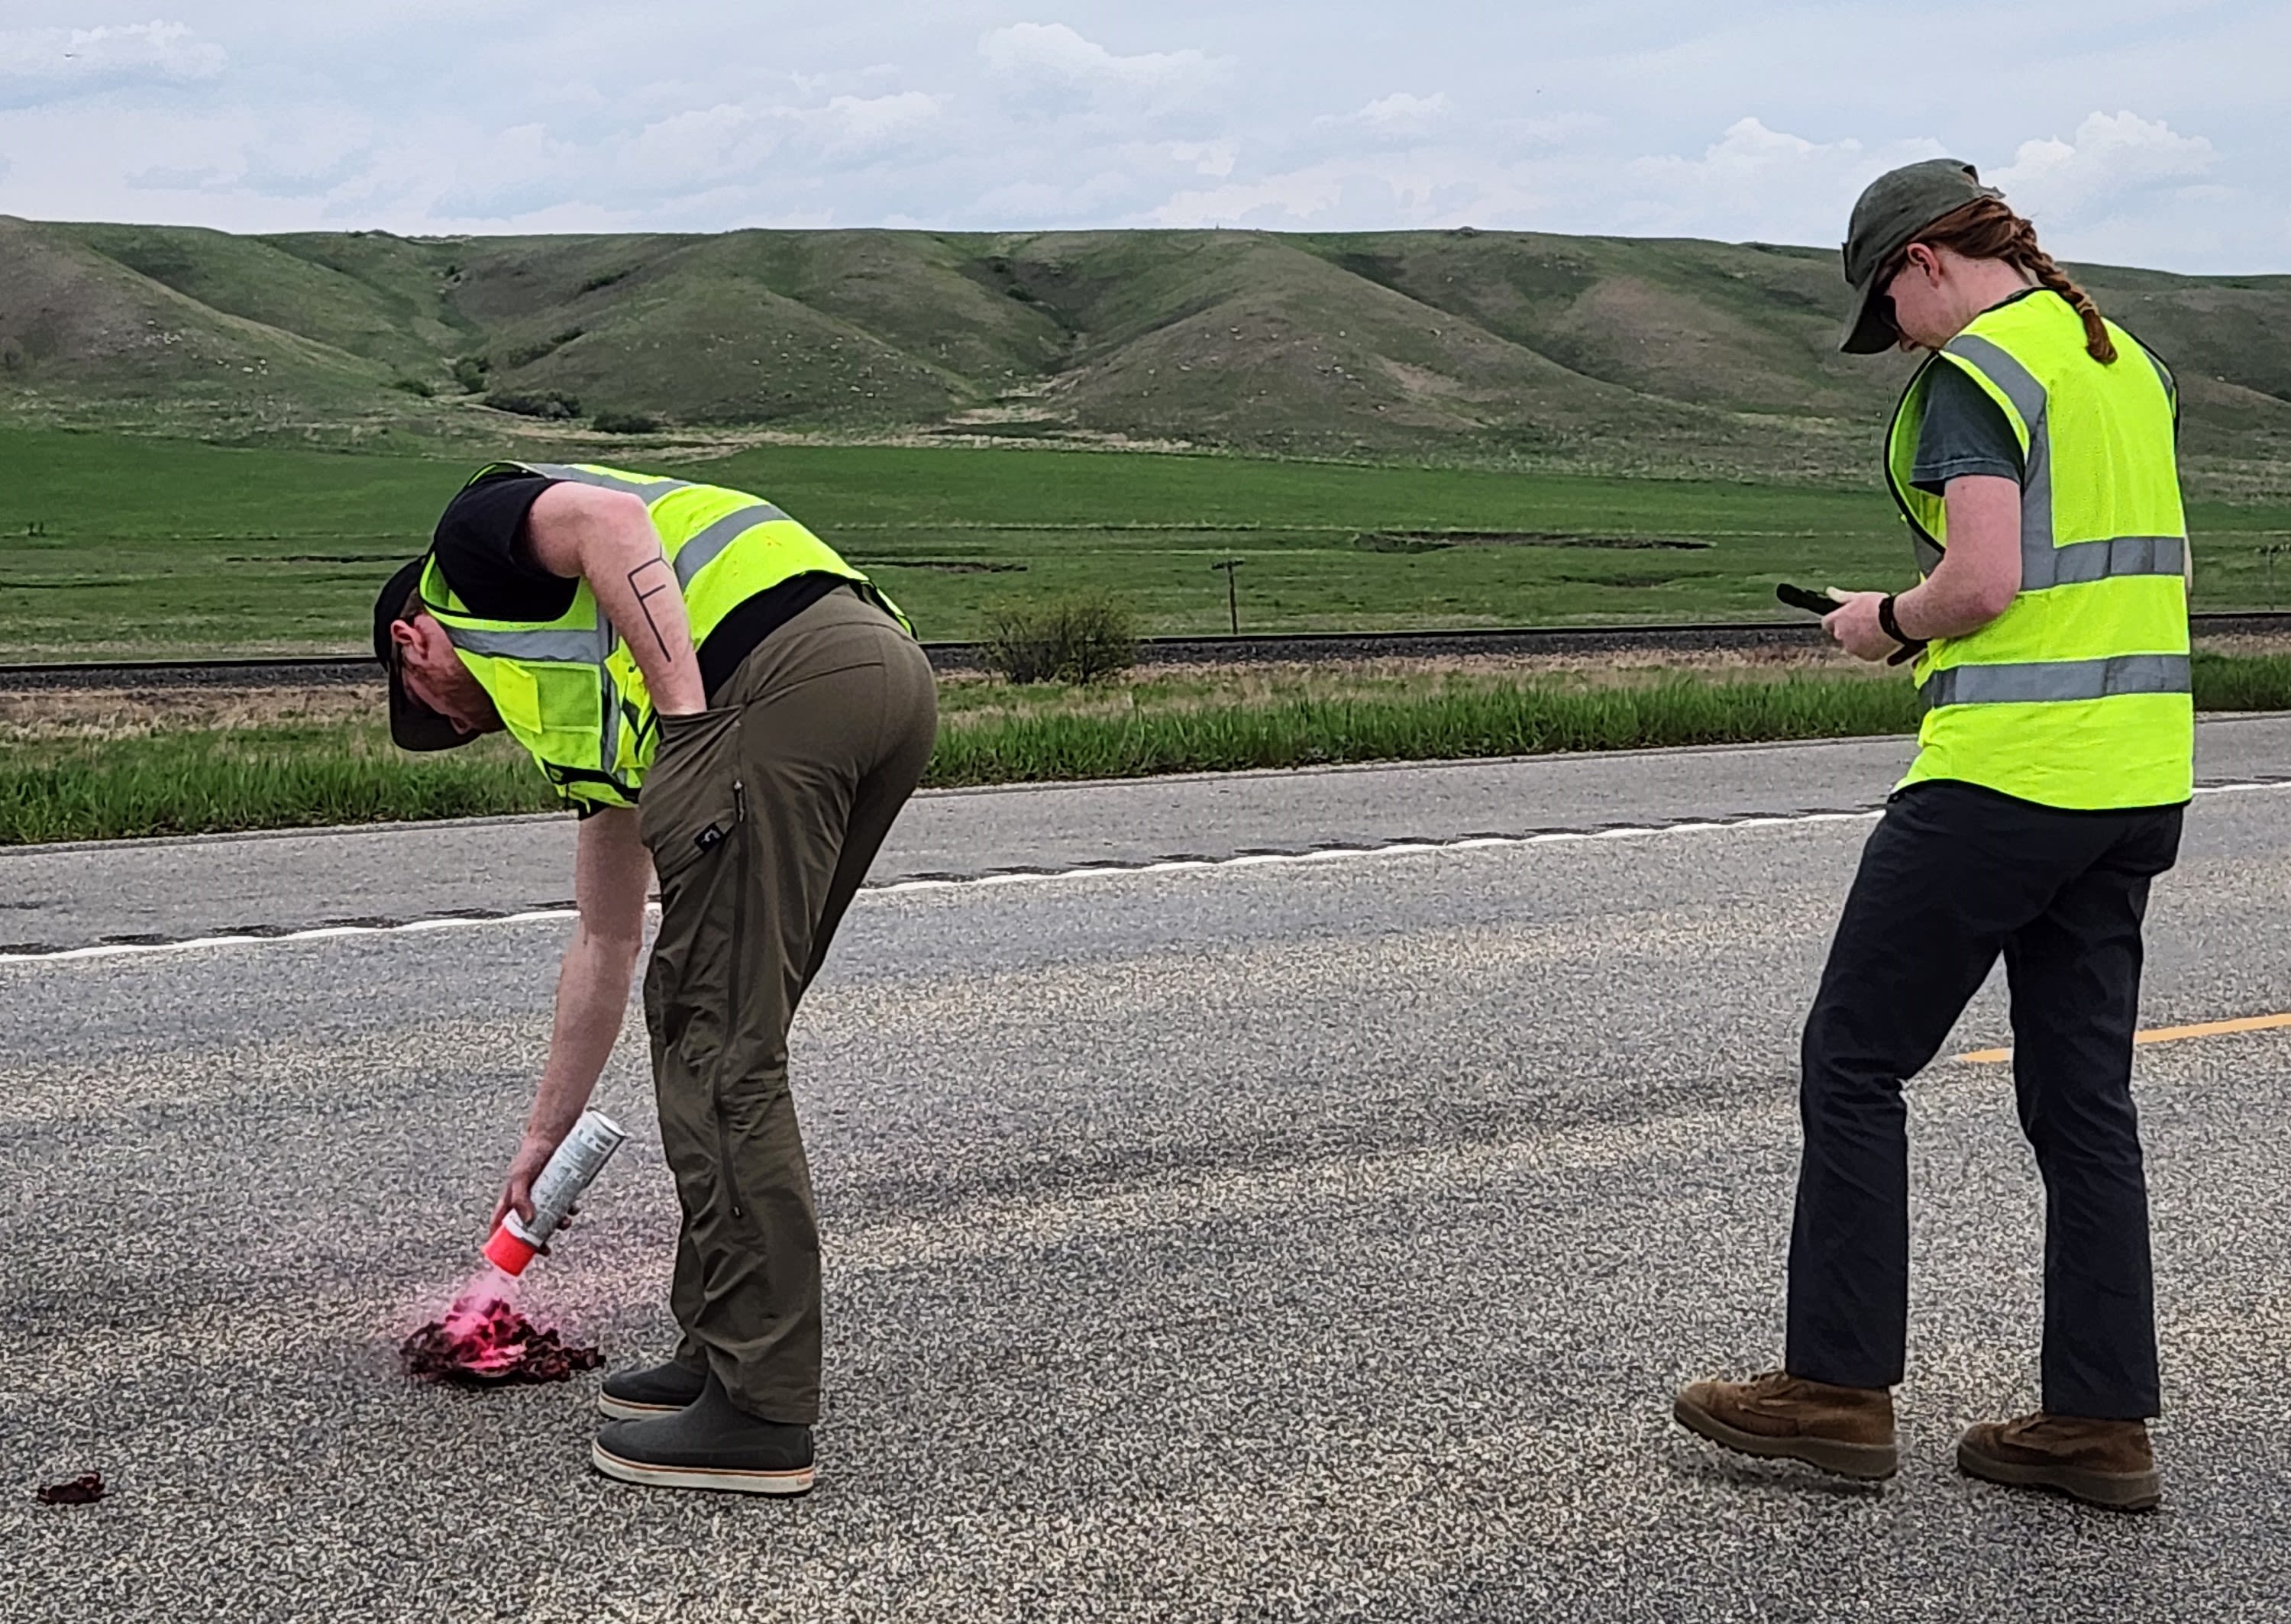 North Dakota roadkill study aims to shed light on hotspots for wildlife-vehicle collisions